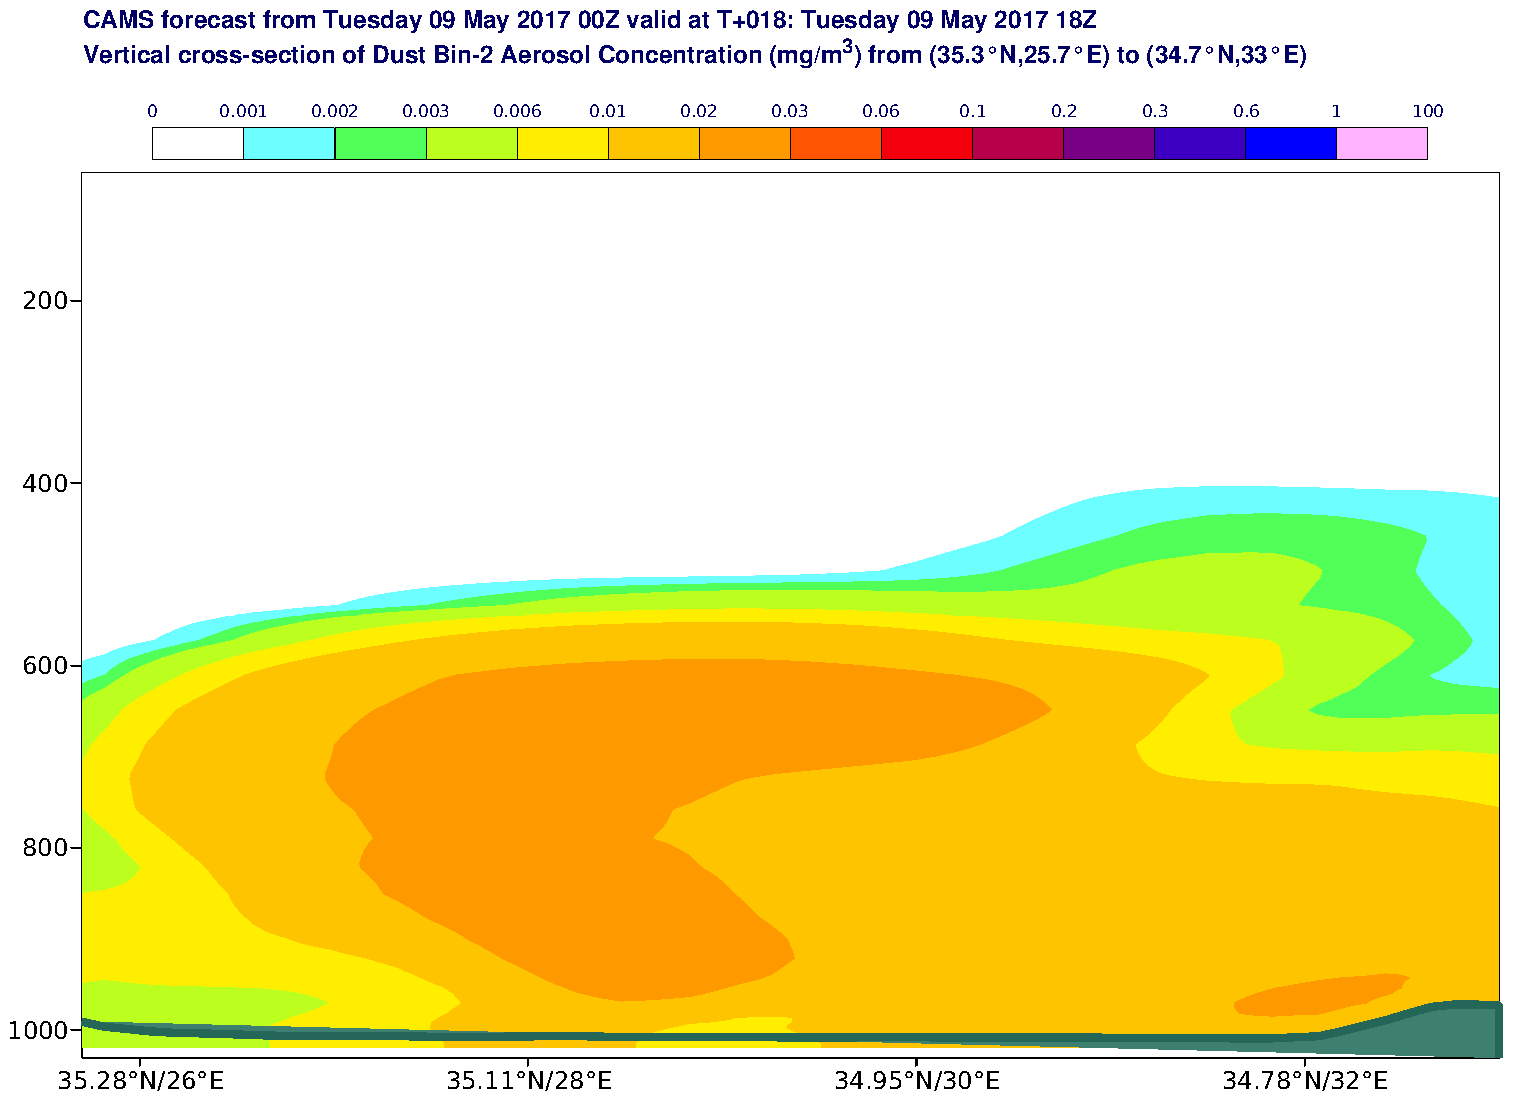 Vertical cross-section of Dust Bin-2 Aerosol Concentration (mg/m3) valid at T18 - 2017-05-09 18:00